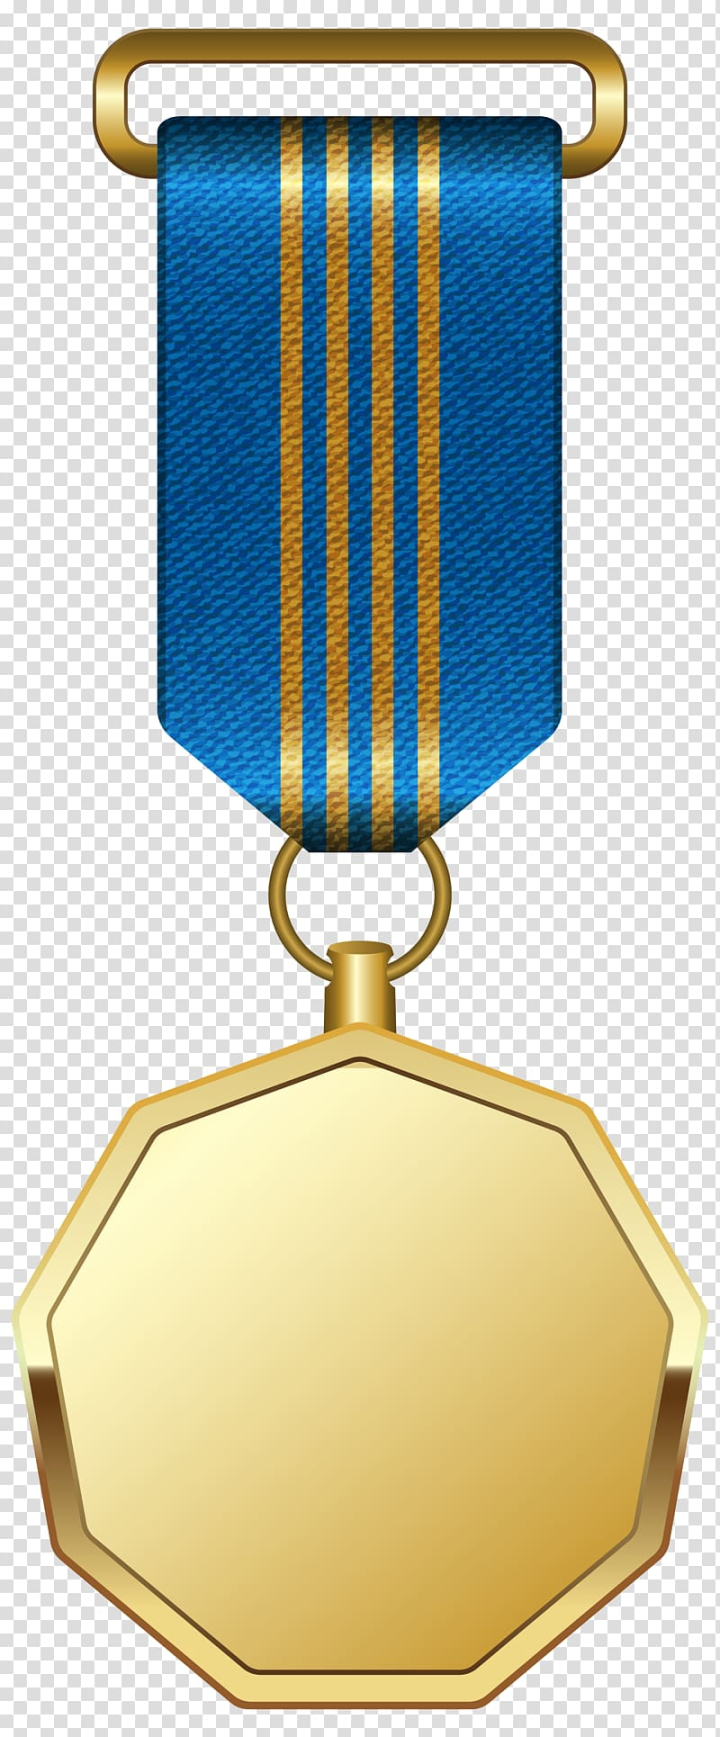 gold,medal,award,blue,ribbon,trophies,prize,olympic medal,trophy and medals,gold medal,silver medal,digital scrapbooking,trophy,gold medal award,blue ribbon,colored,illustration,png clipart,free png,transparent background,free clipart,clip art,free download,png,comhiclipart